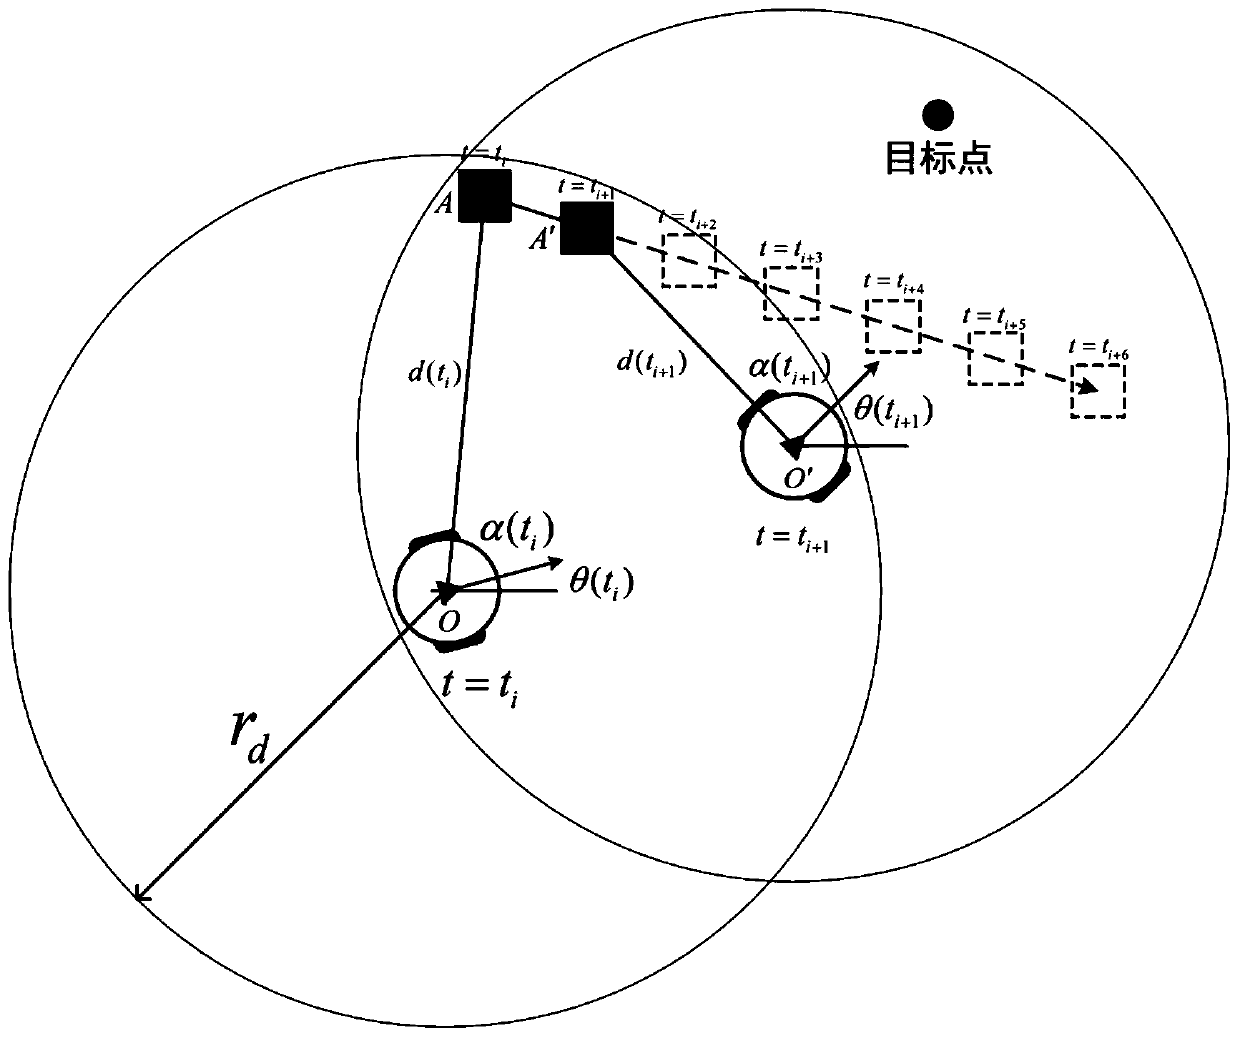 An Obstacle Avoidance Method Based on Dynamic Window and Virtual Target Point